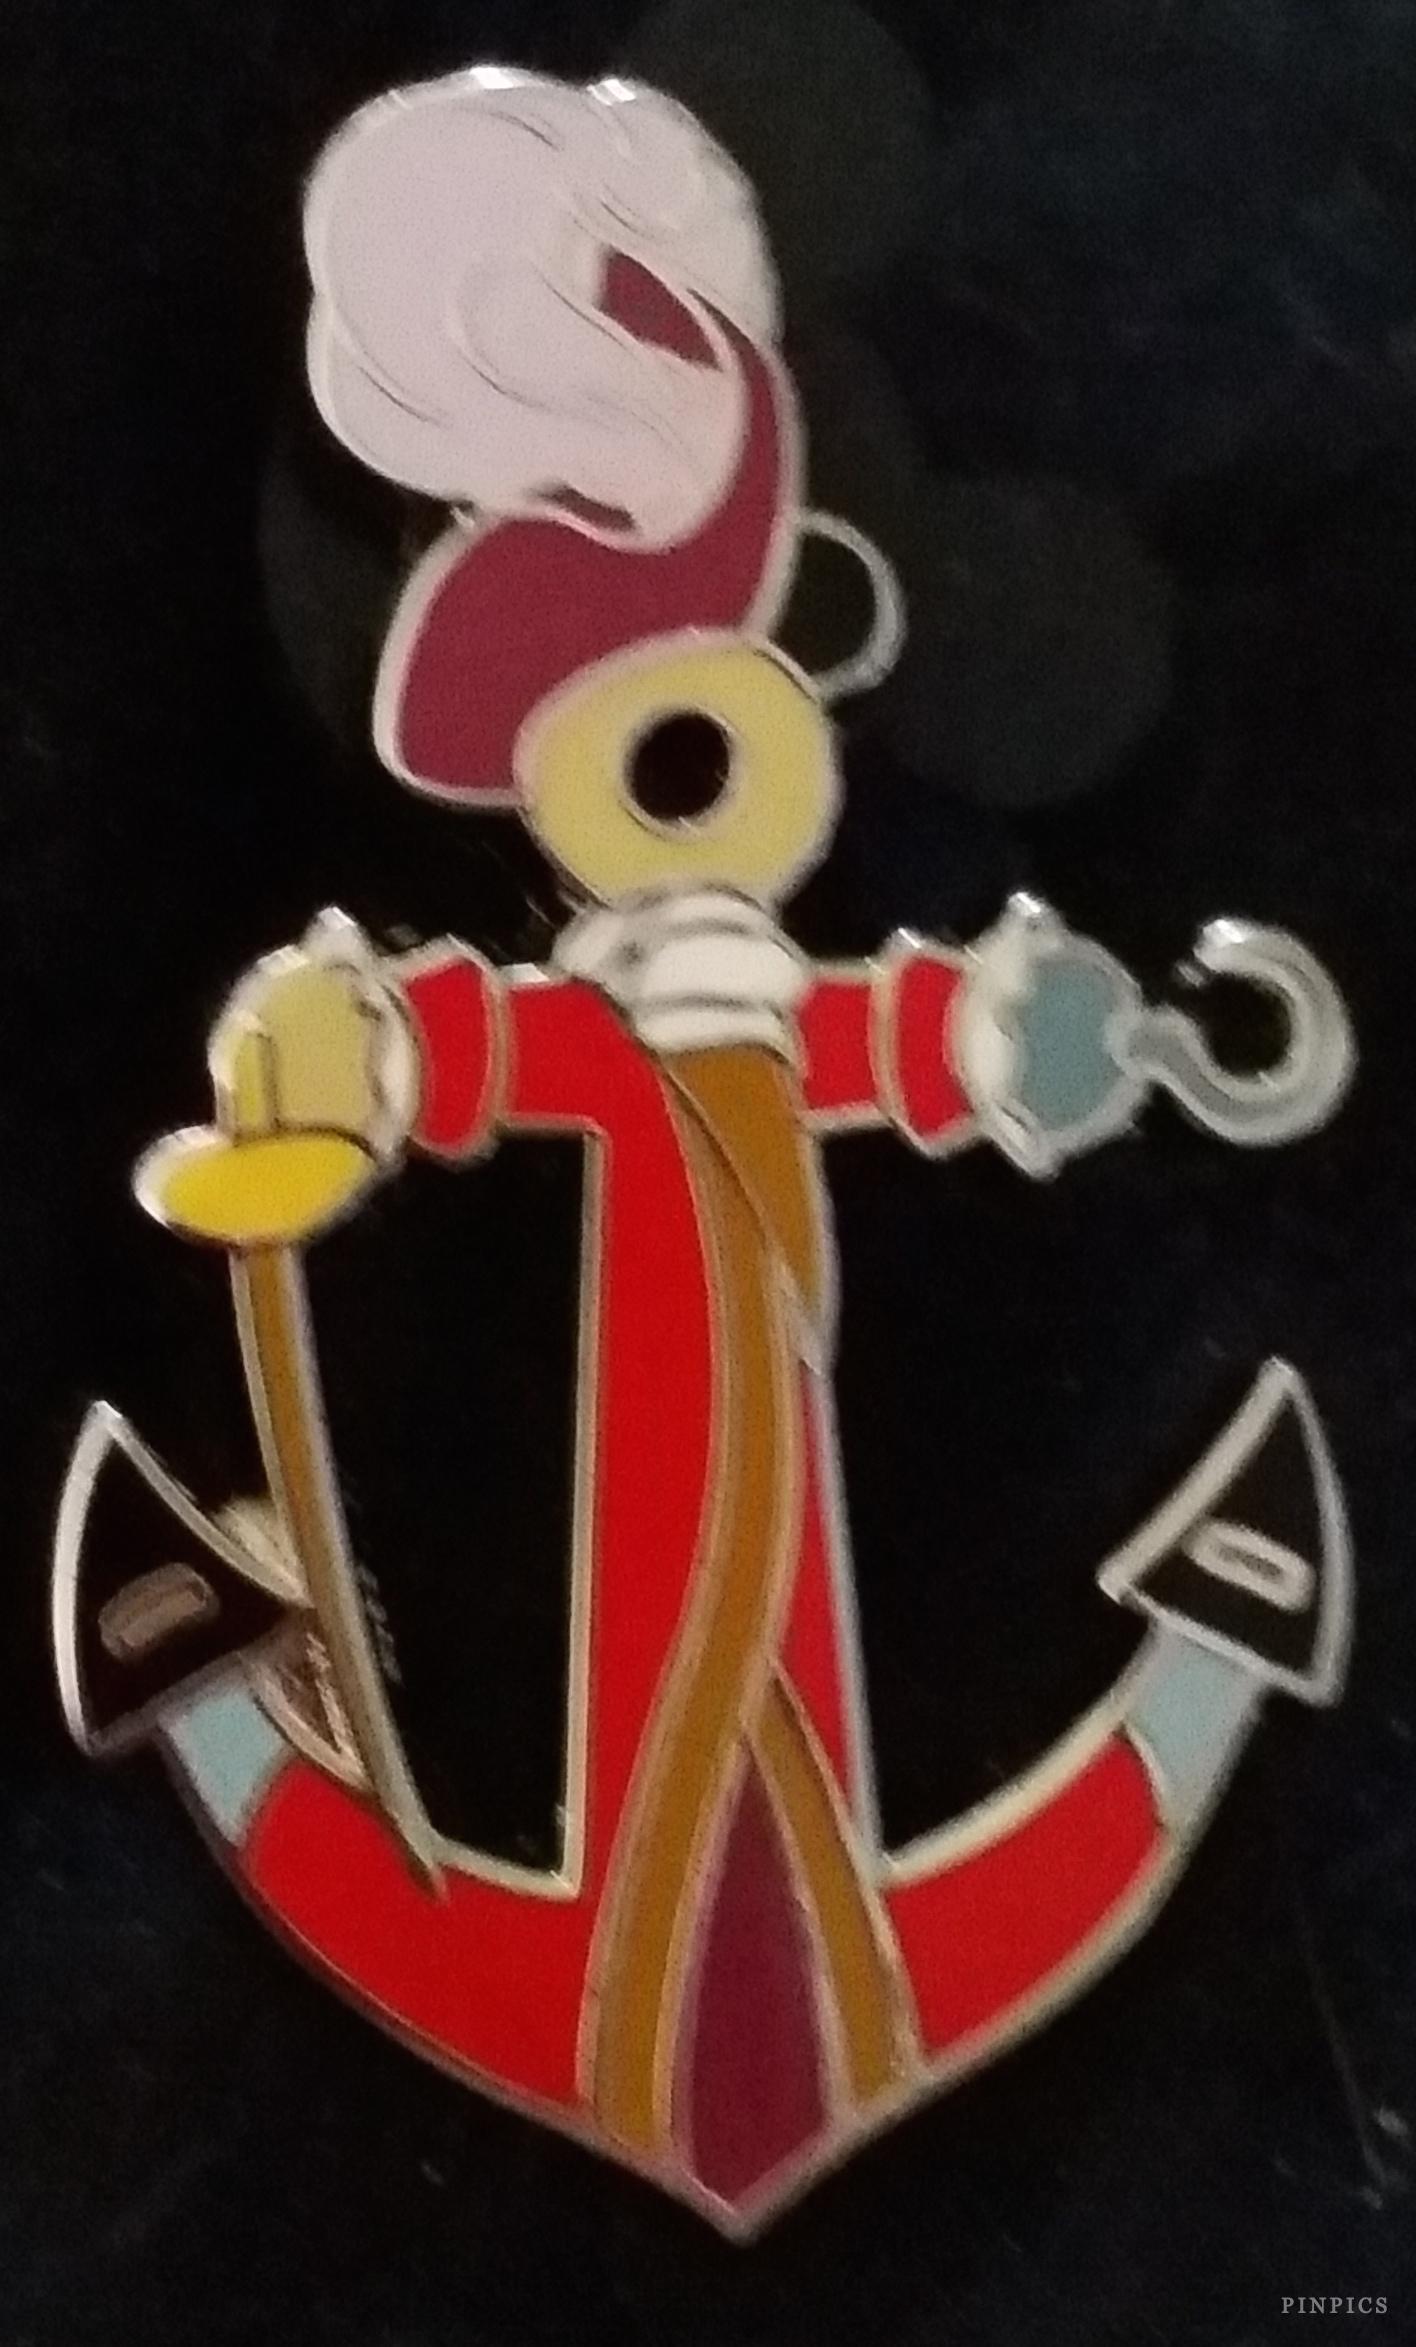 DCL - Mystery Anchor Series #2 - Captain Hook